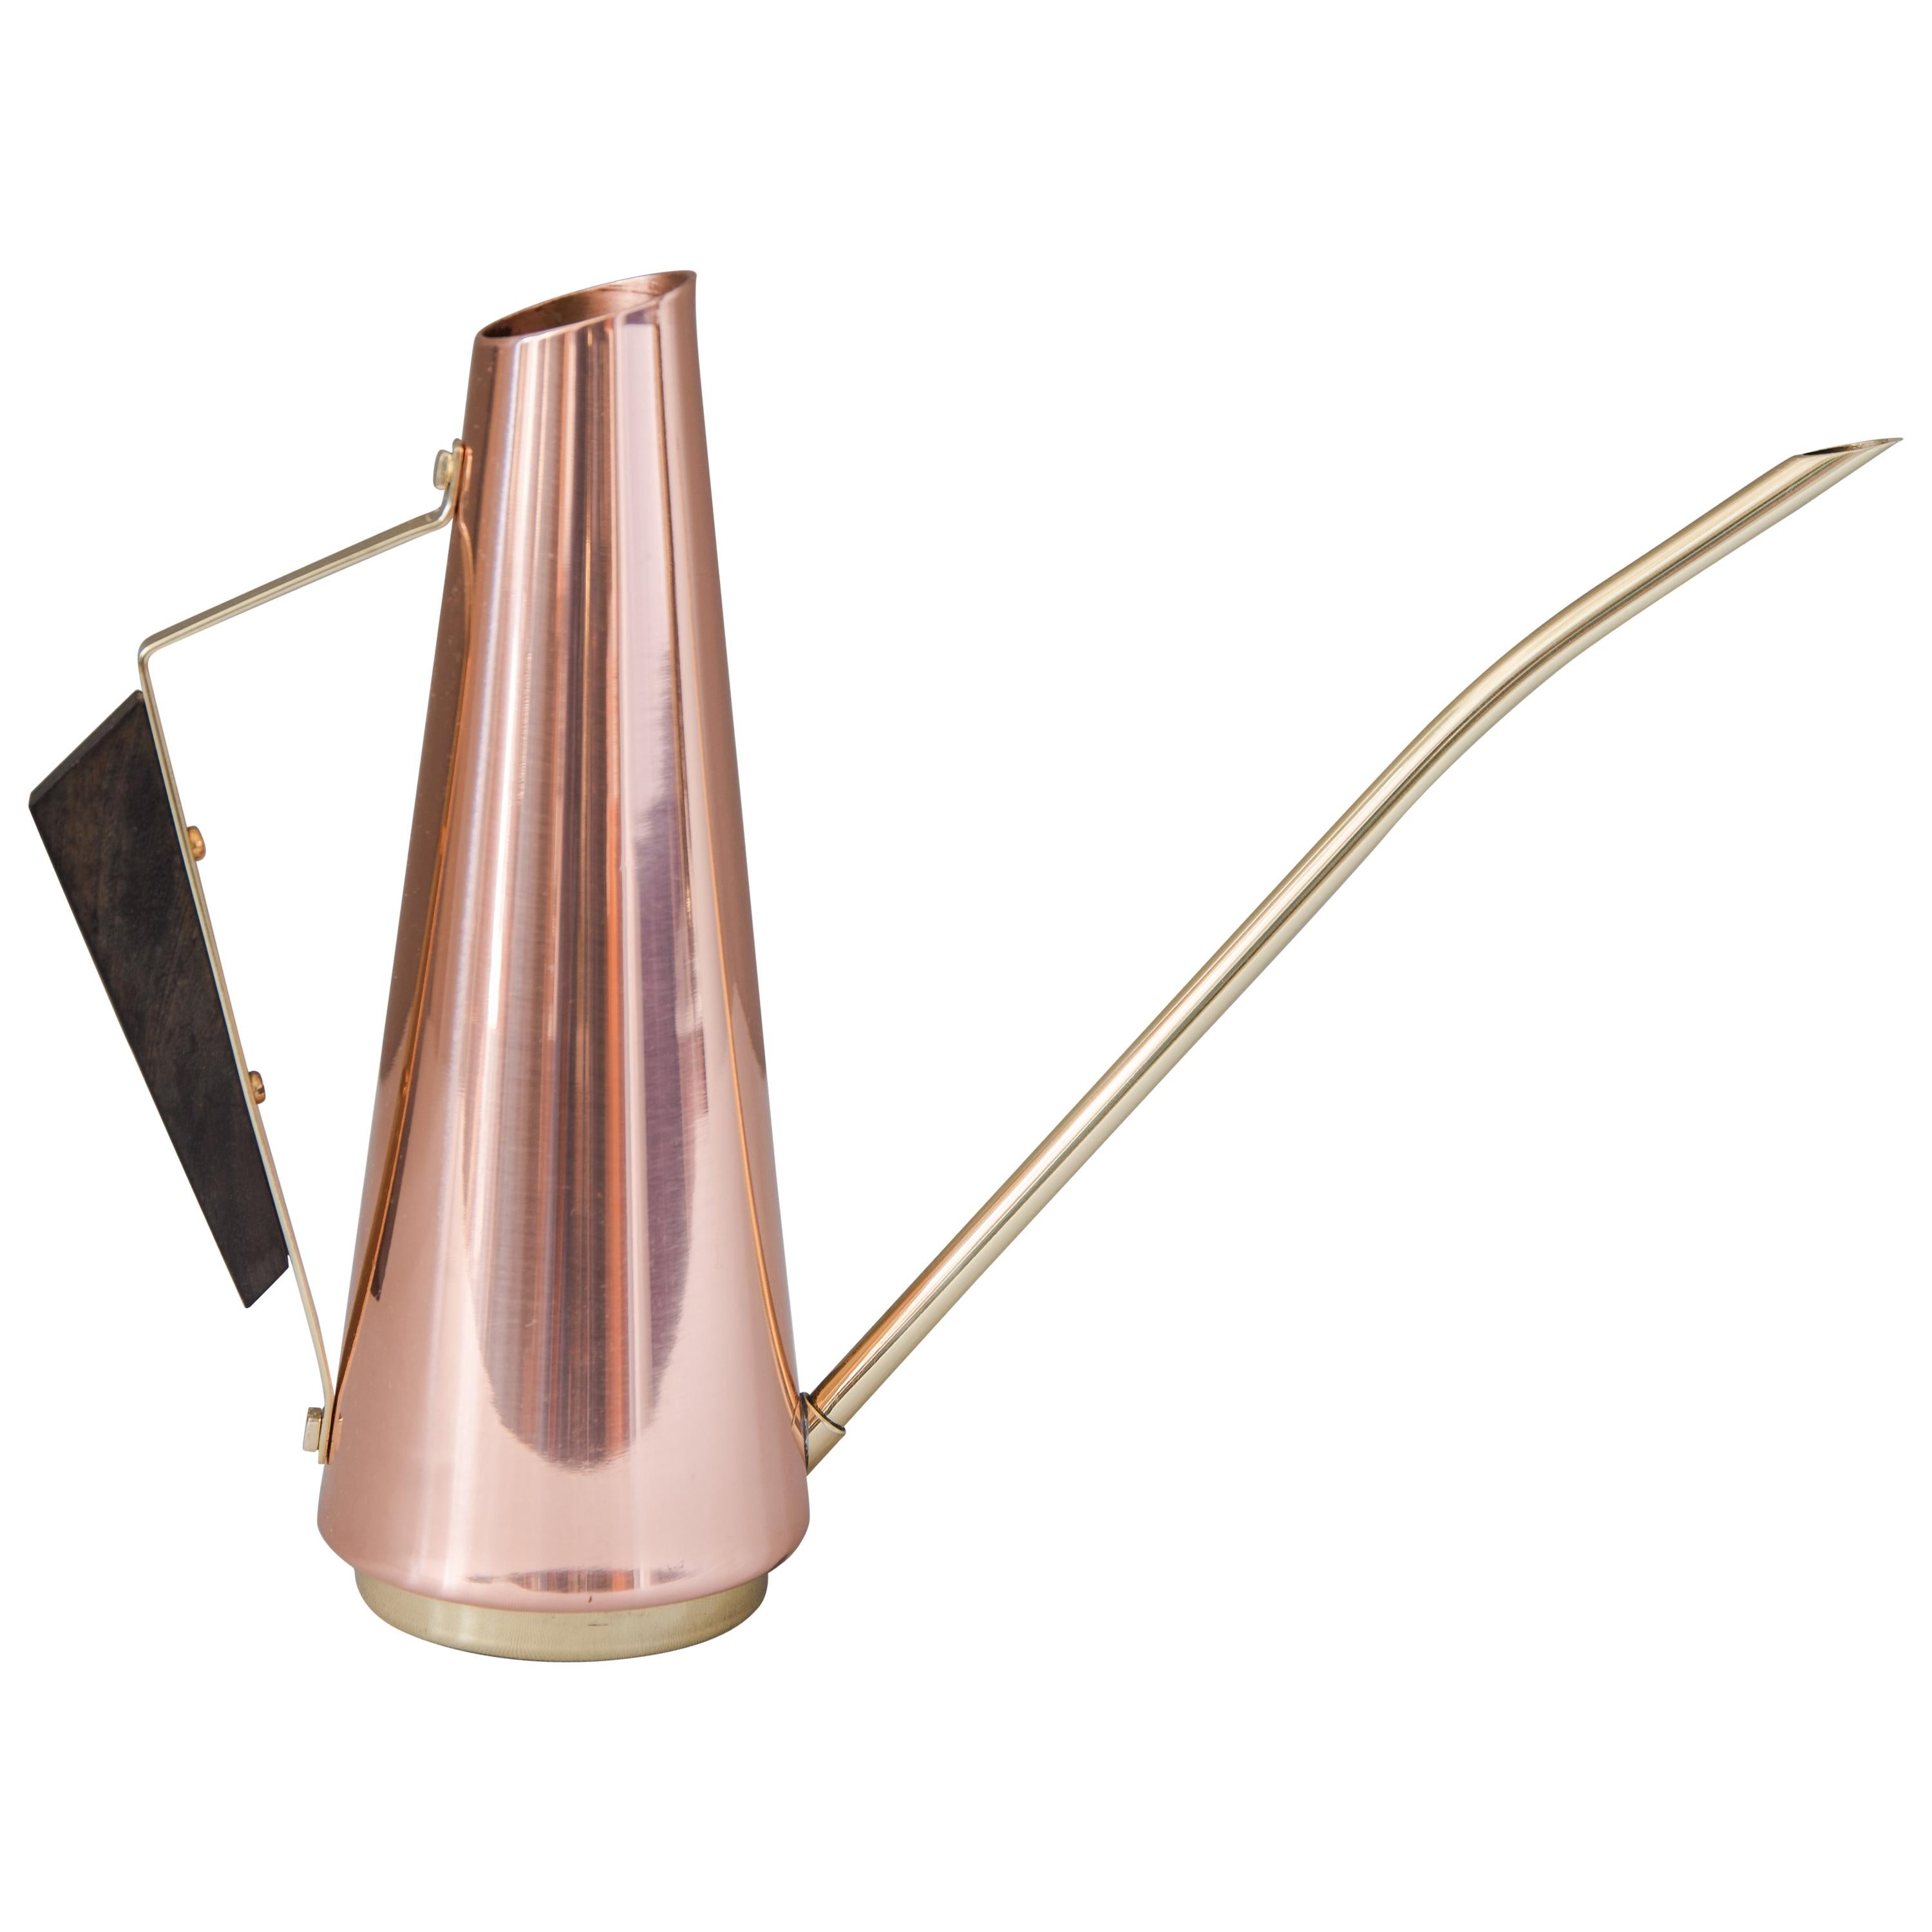 Copper Watering Can with Wood Handle and Brass Parts, circa 1960s